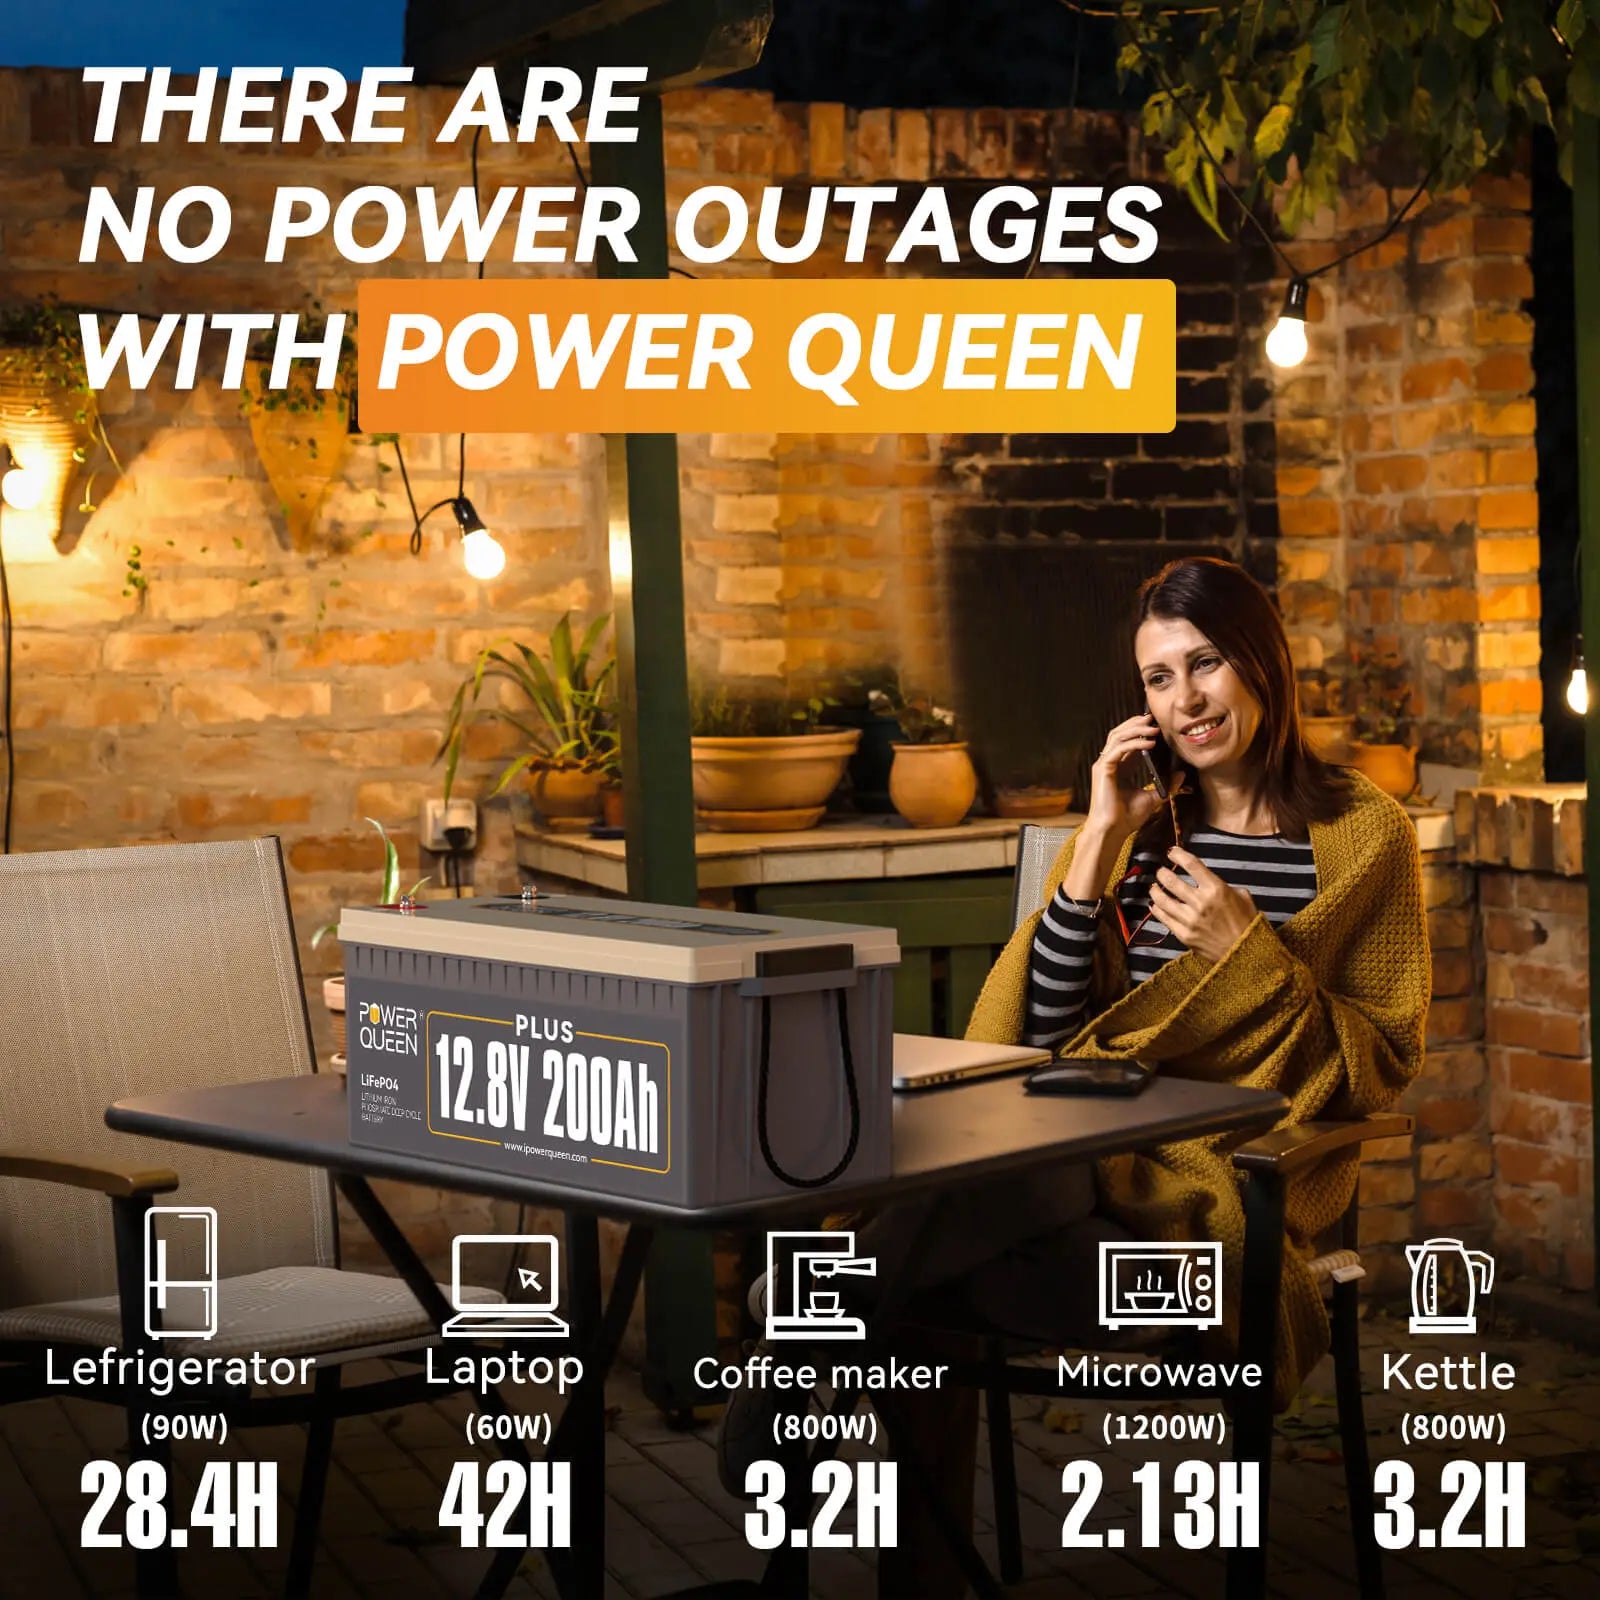 Power Queen 12.8V 200Ah Plus LiFePO4 Battery + 14.6V 20A Charger Power Queen